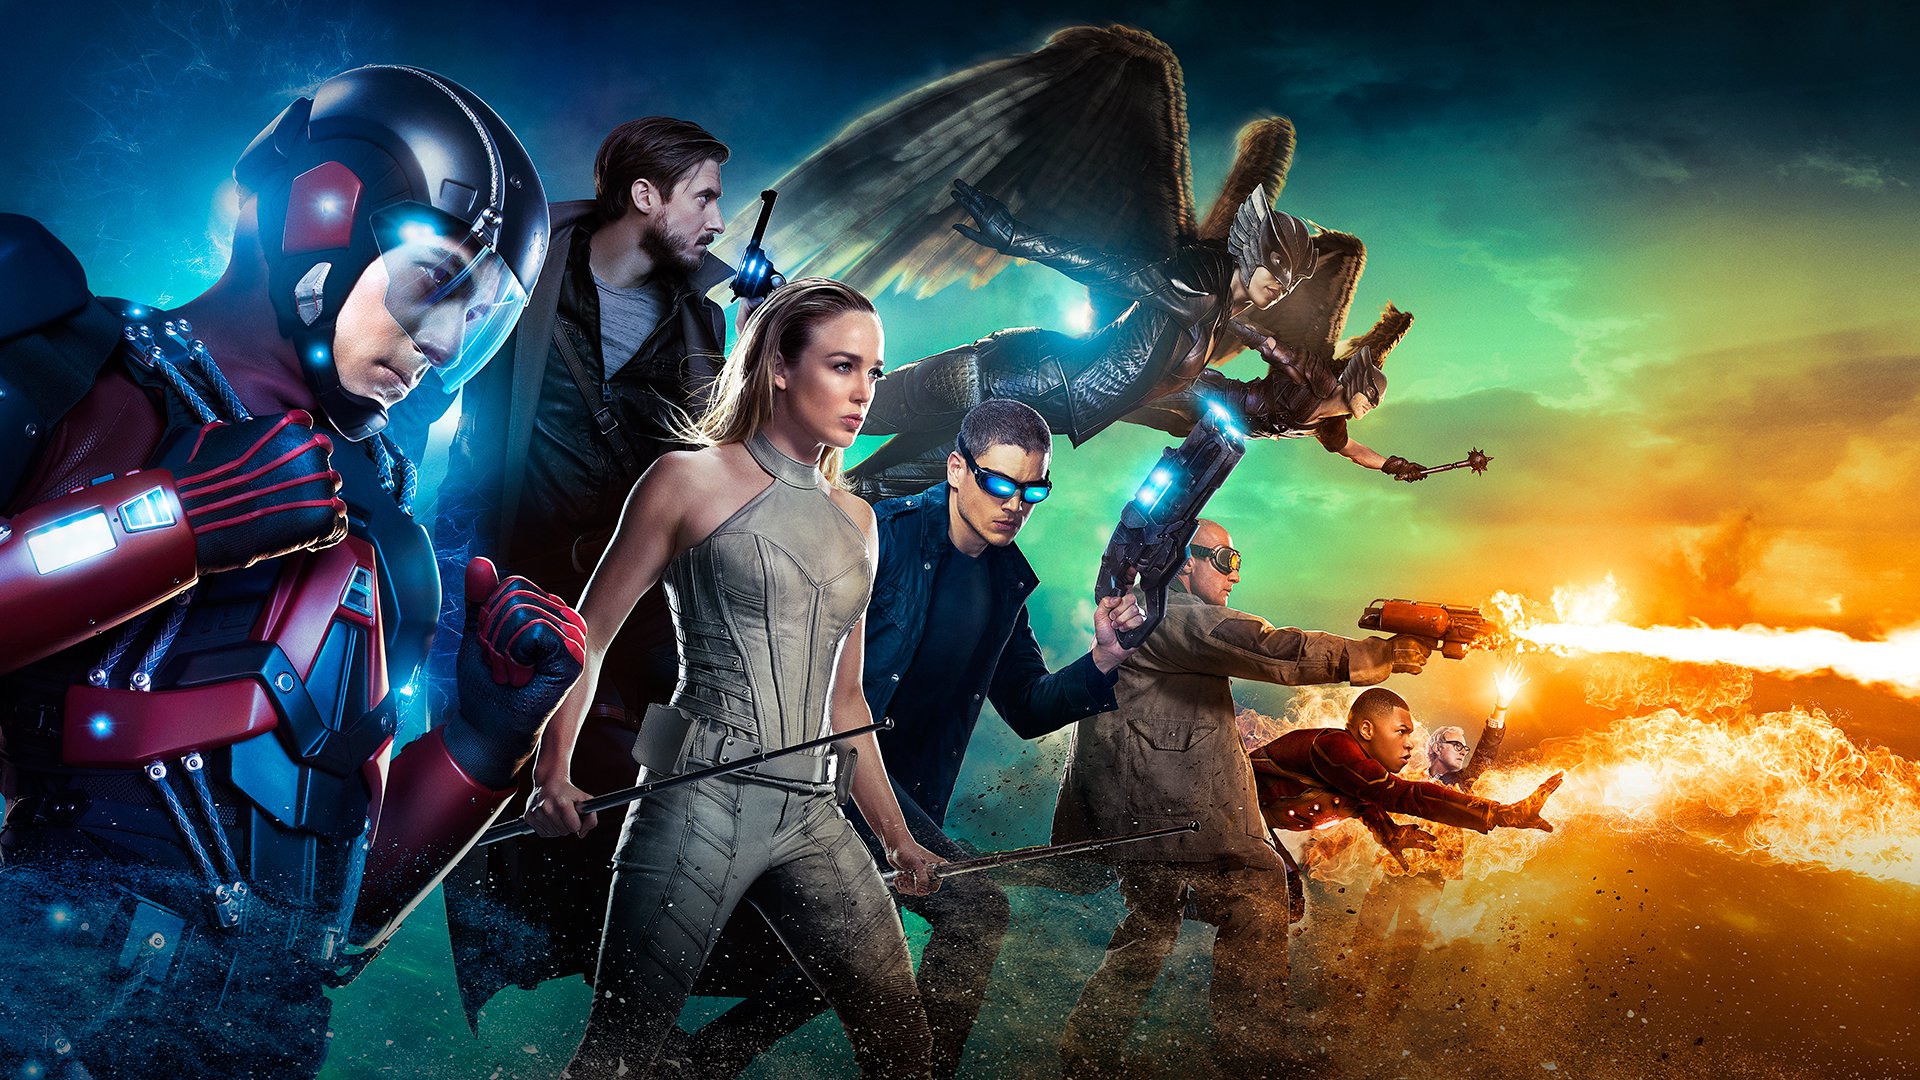 Poster Of Dc'S Legends Of Tomorrow Wallpapers